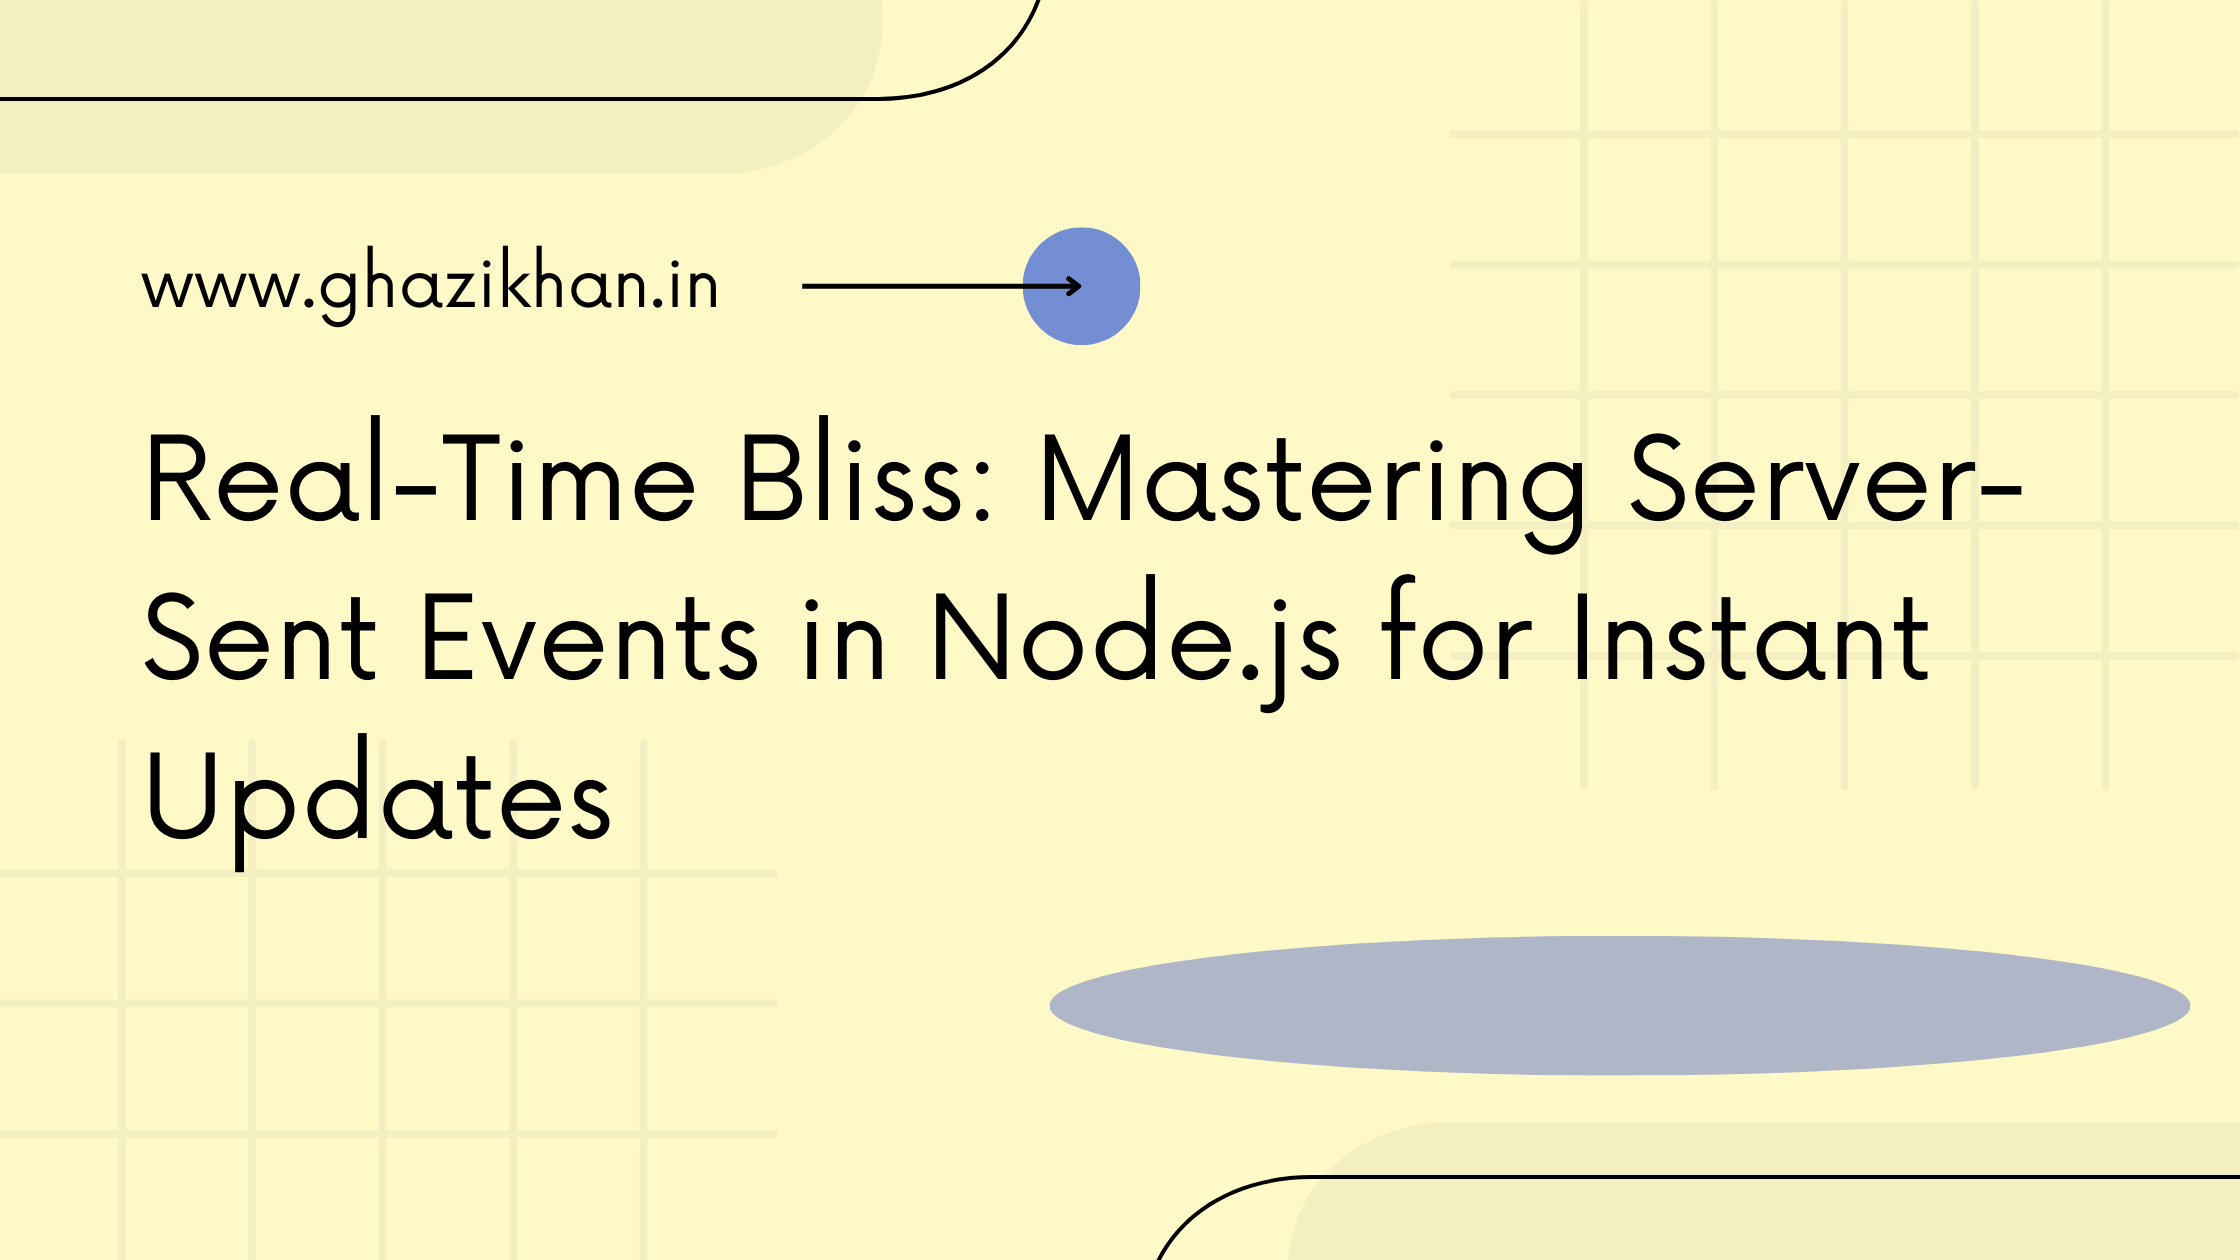 Real-Time Bliss: Mastering Server-Sent Events in Node.js for Instant Updates